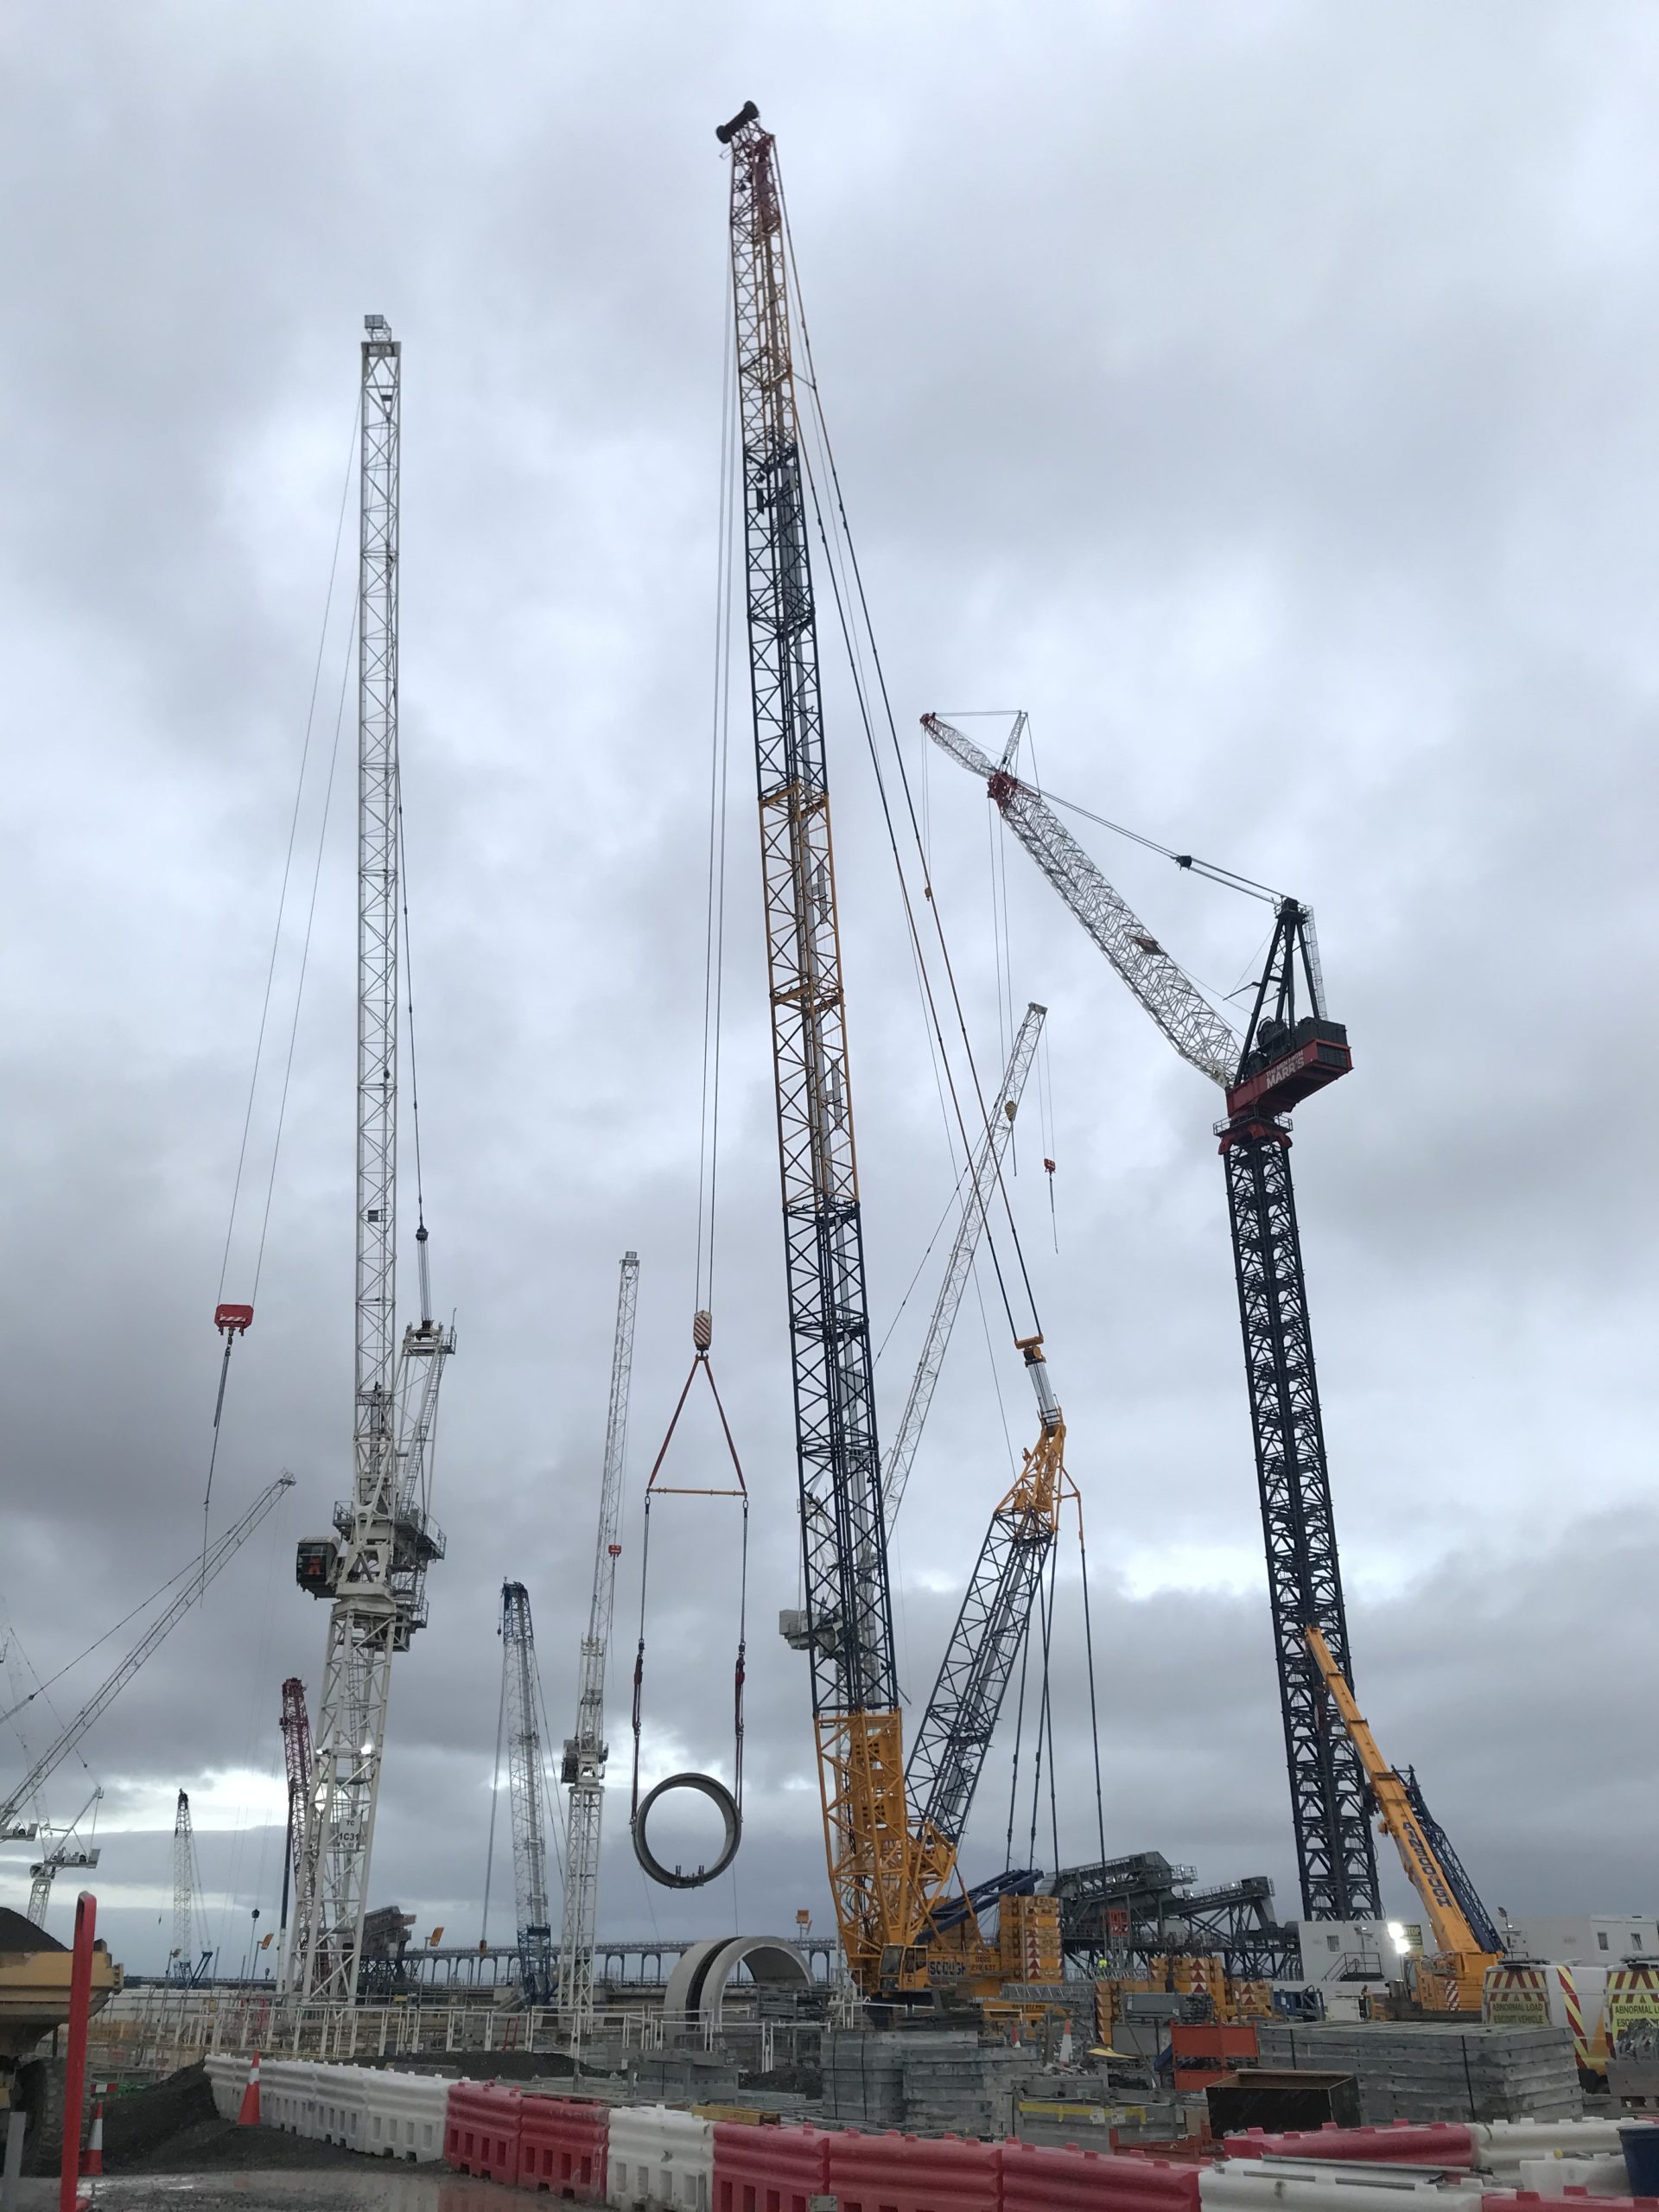 Ainscough Crane Hire installs pipes for nuclear reactor at Hinkley Point C